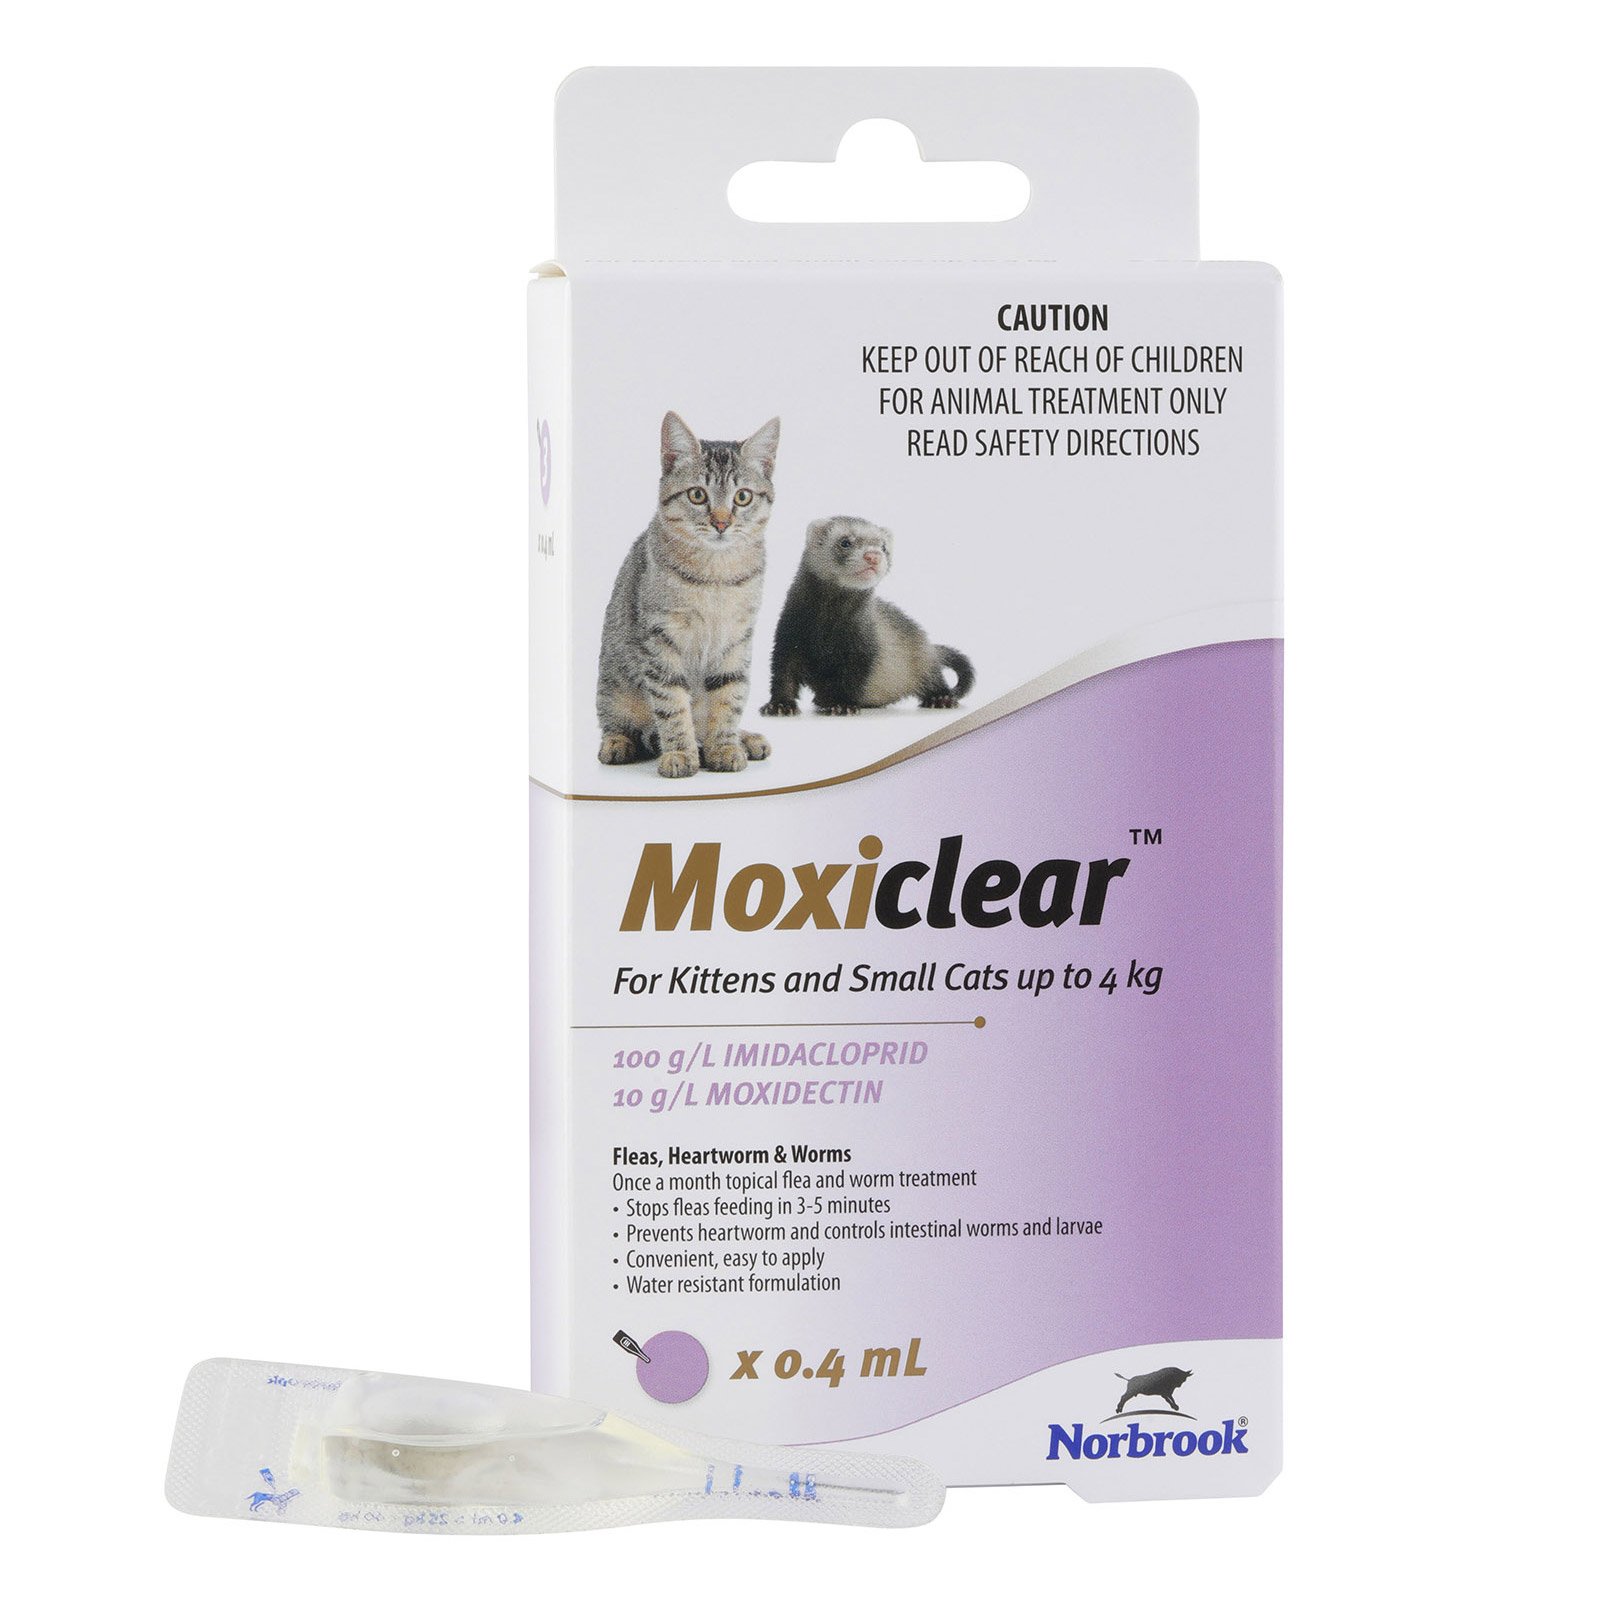 Moxiclear For Kittens And Small Cats Up To 4 Kg (Purple) 6 Pack